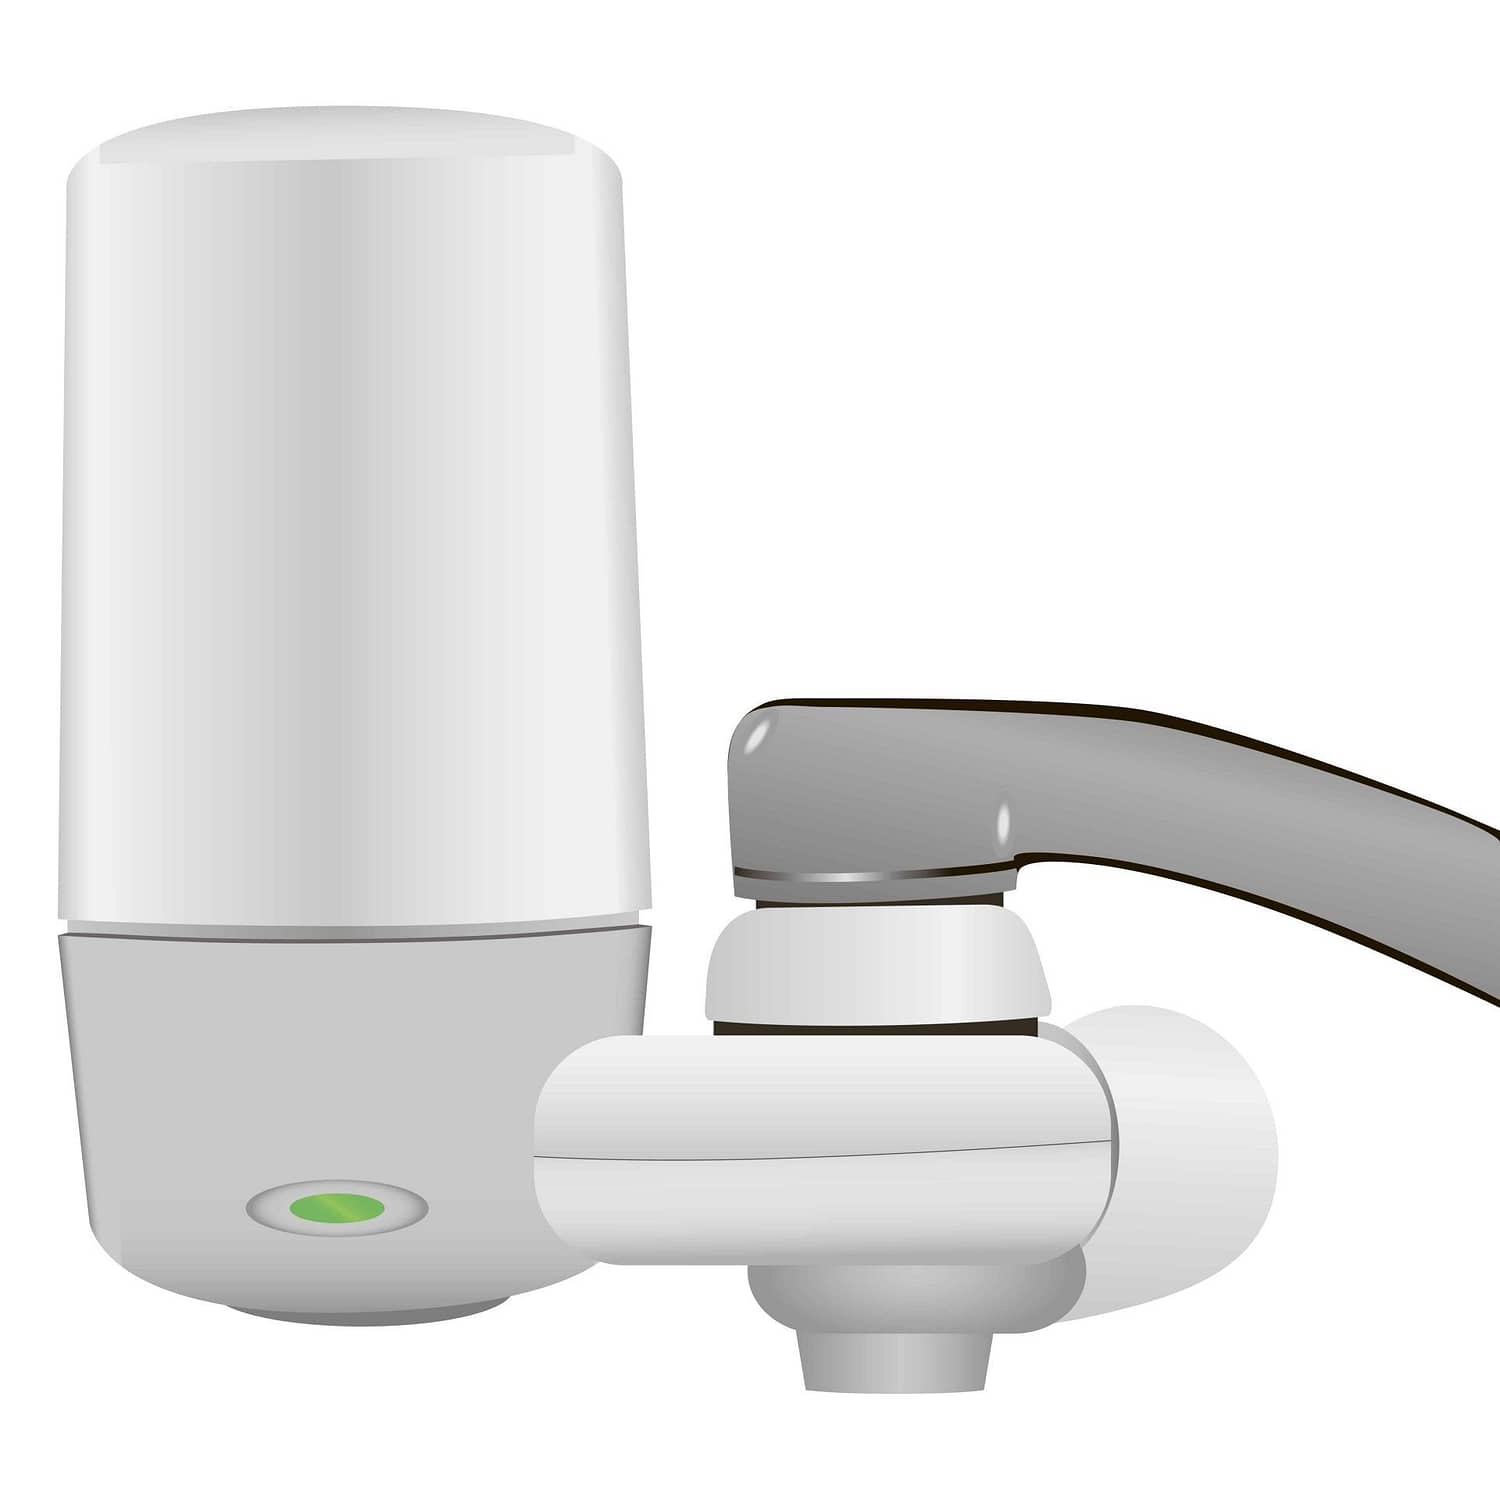 Household filter faucet connection system. Vector illustration.